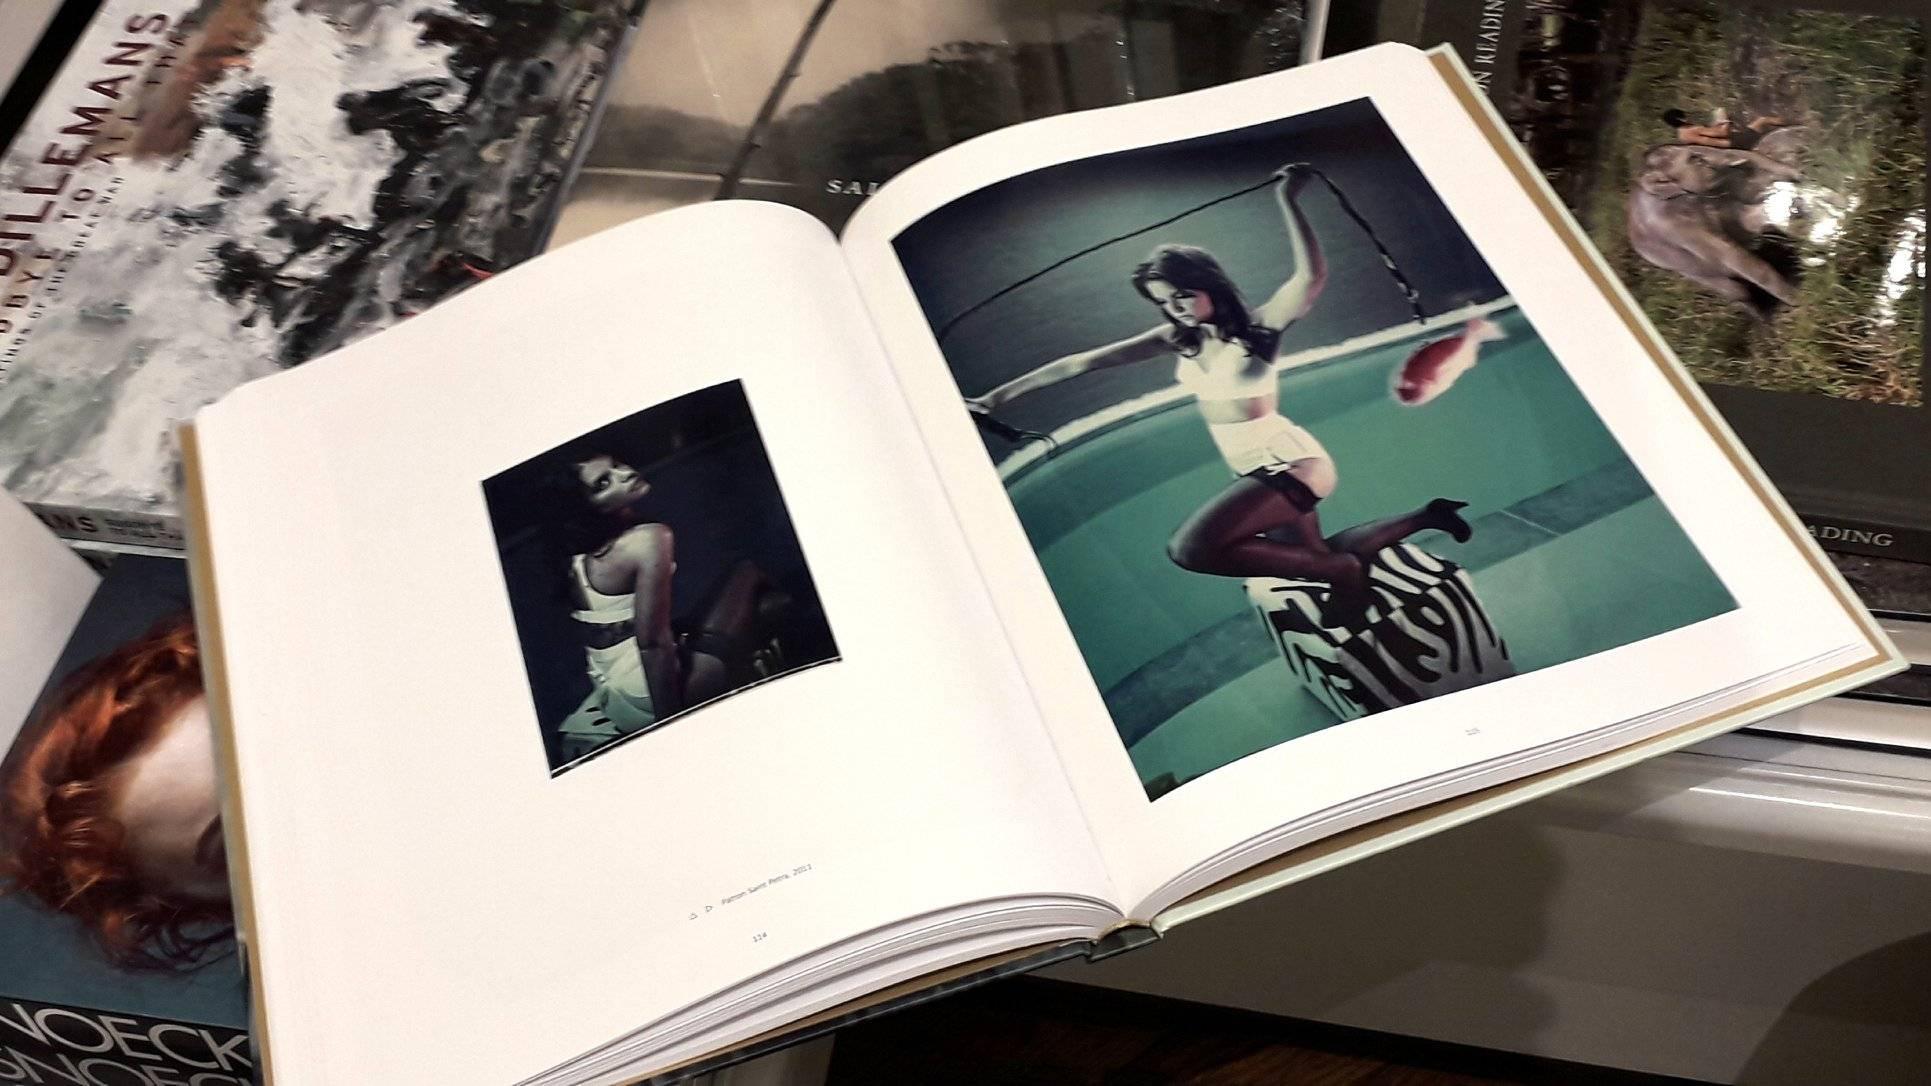 'The Eyes of the Fox' book signed including 'Camisole', Edition of 3 - Contemporary Photograph by Carmen de Vos